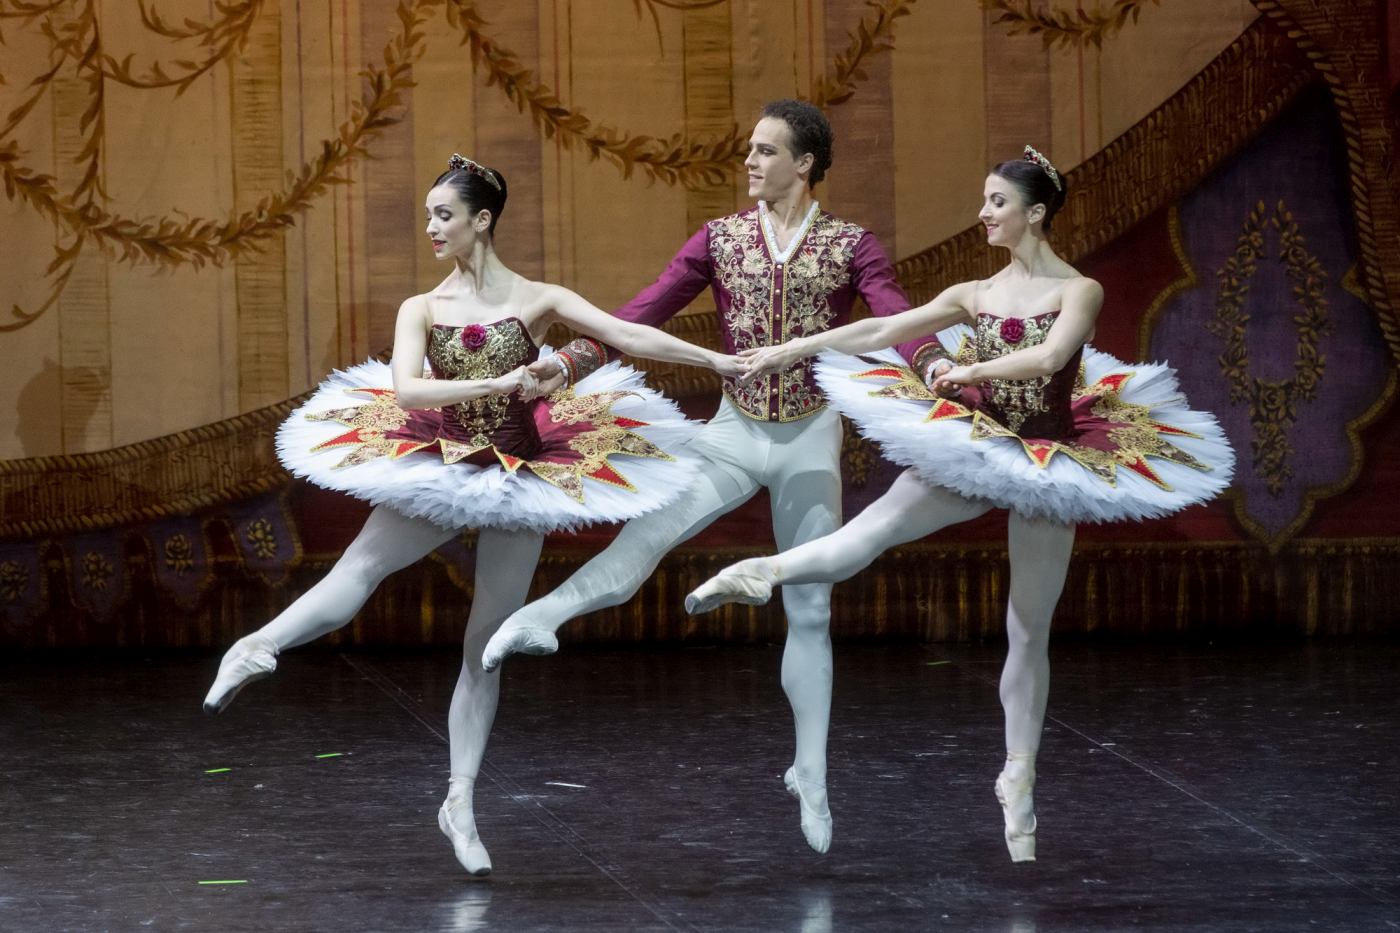 5. L.Felméry, A.Rónai, and C.Balaban, “Paquita Suite” by T.Solymosi, A.Mirzoyan, and I.Prokofieva after M.Petipa; Ballet of the Hungarian State Opera 2022 © P.Rákossy / Hungarian State Opera 